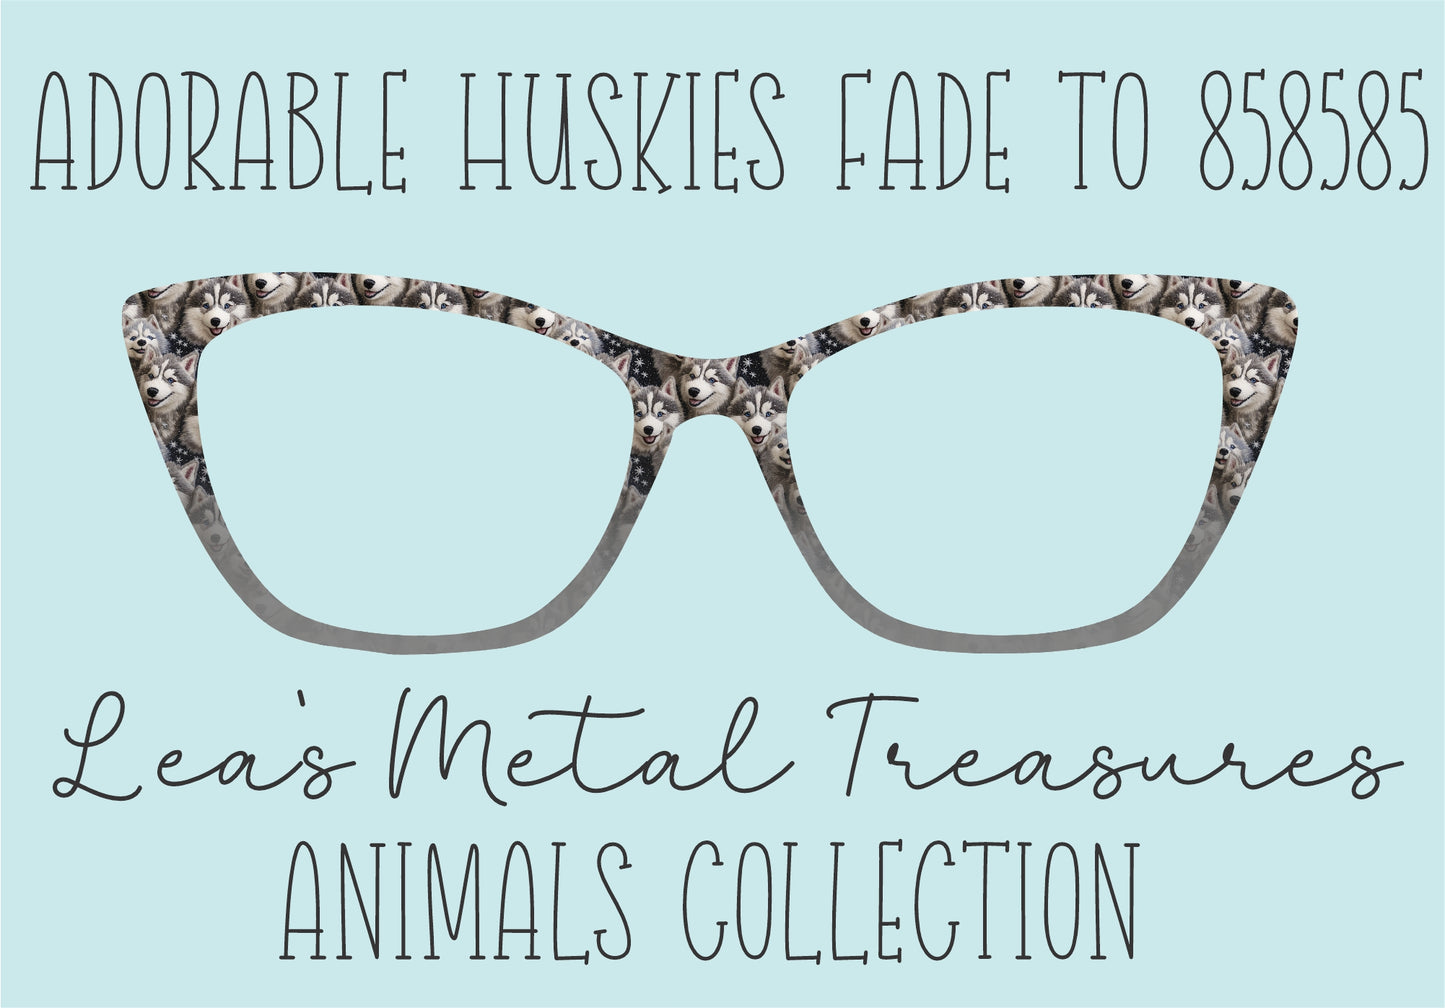 ADORABLE HUSKIES FADE TO 858585 Eyewear Frame Toppers COMES WITH MAGNETS